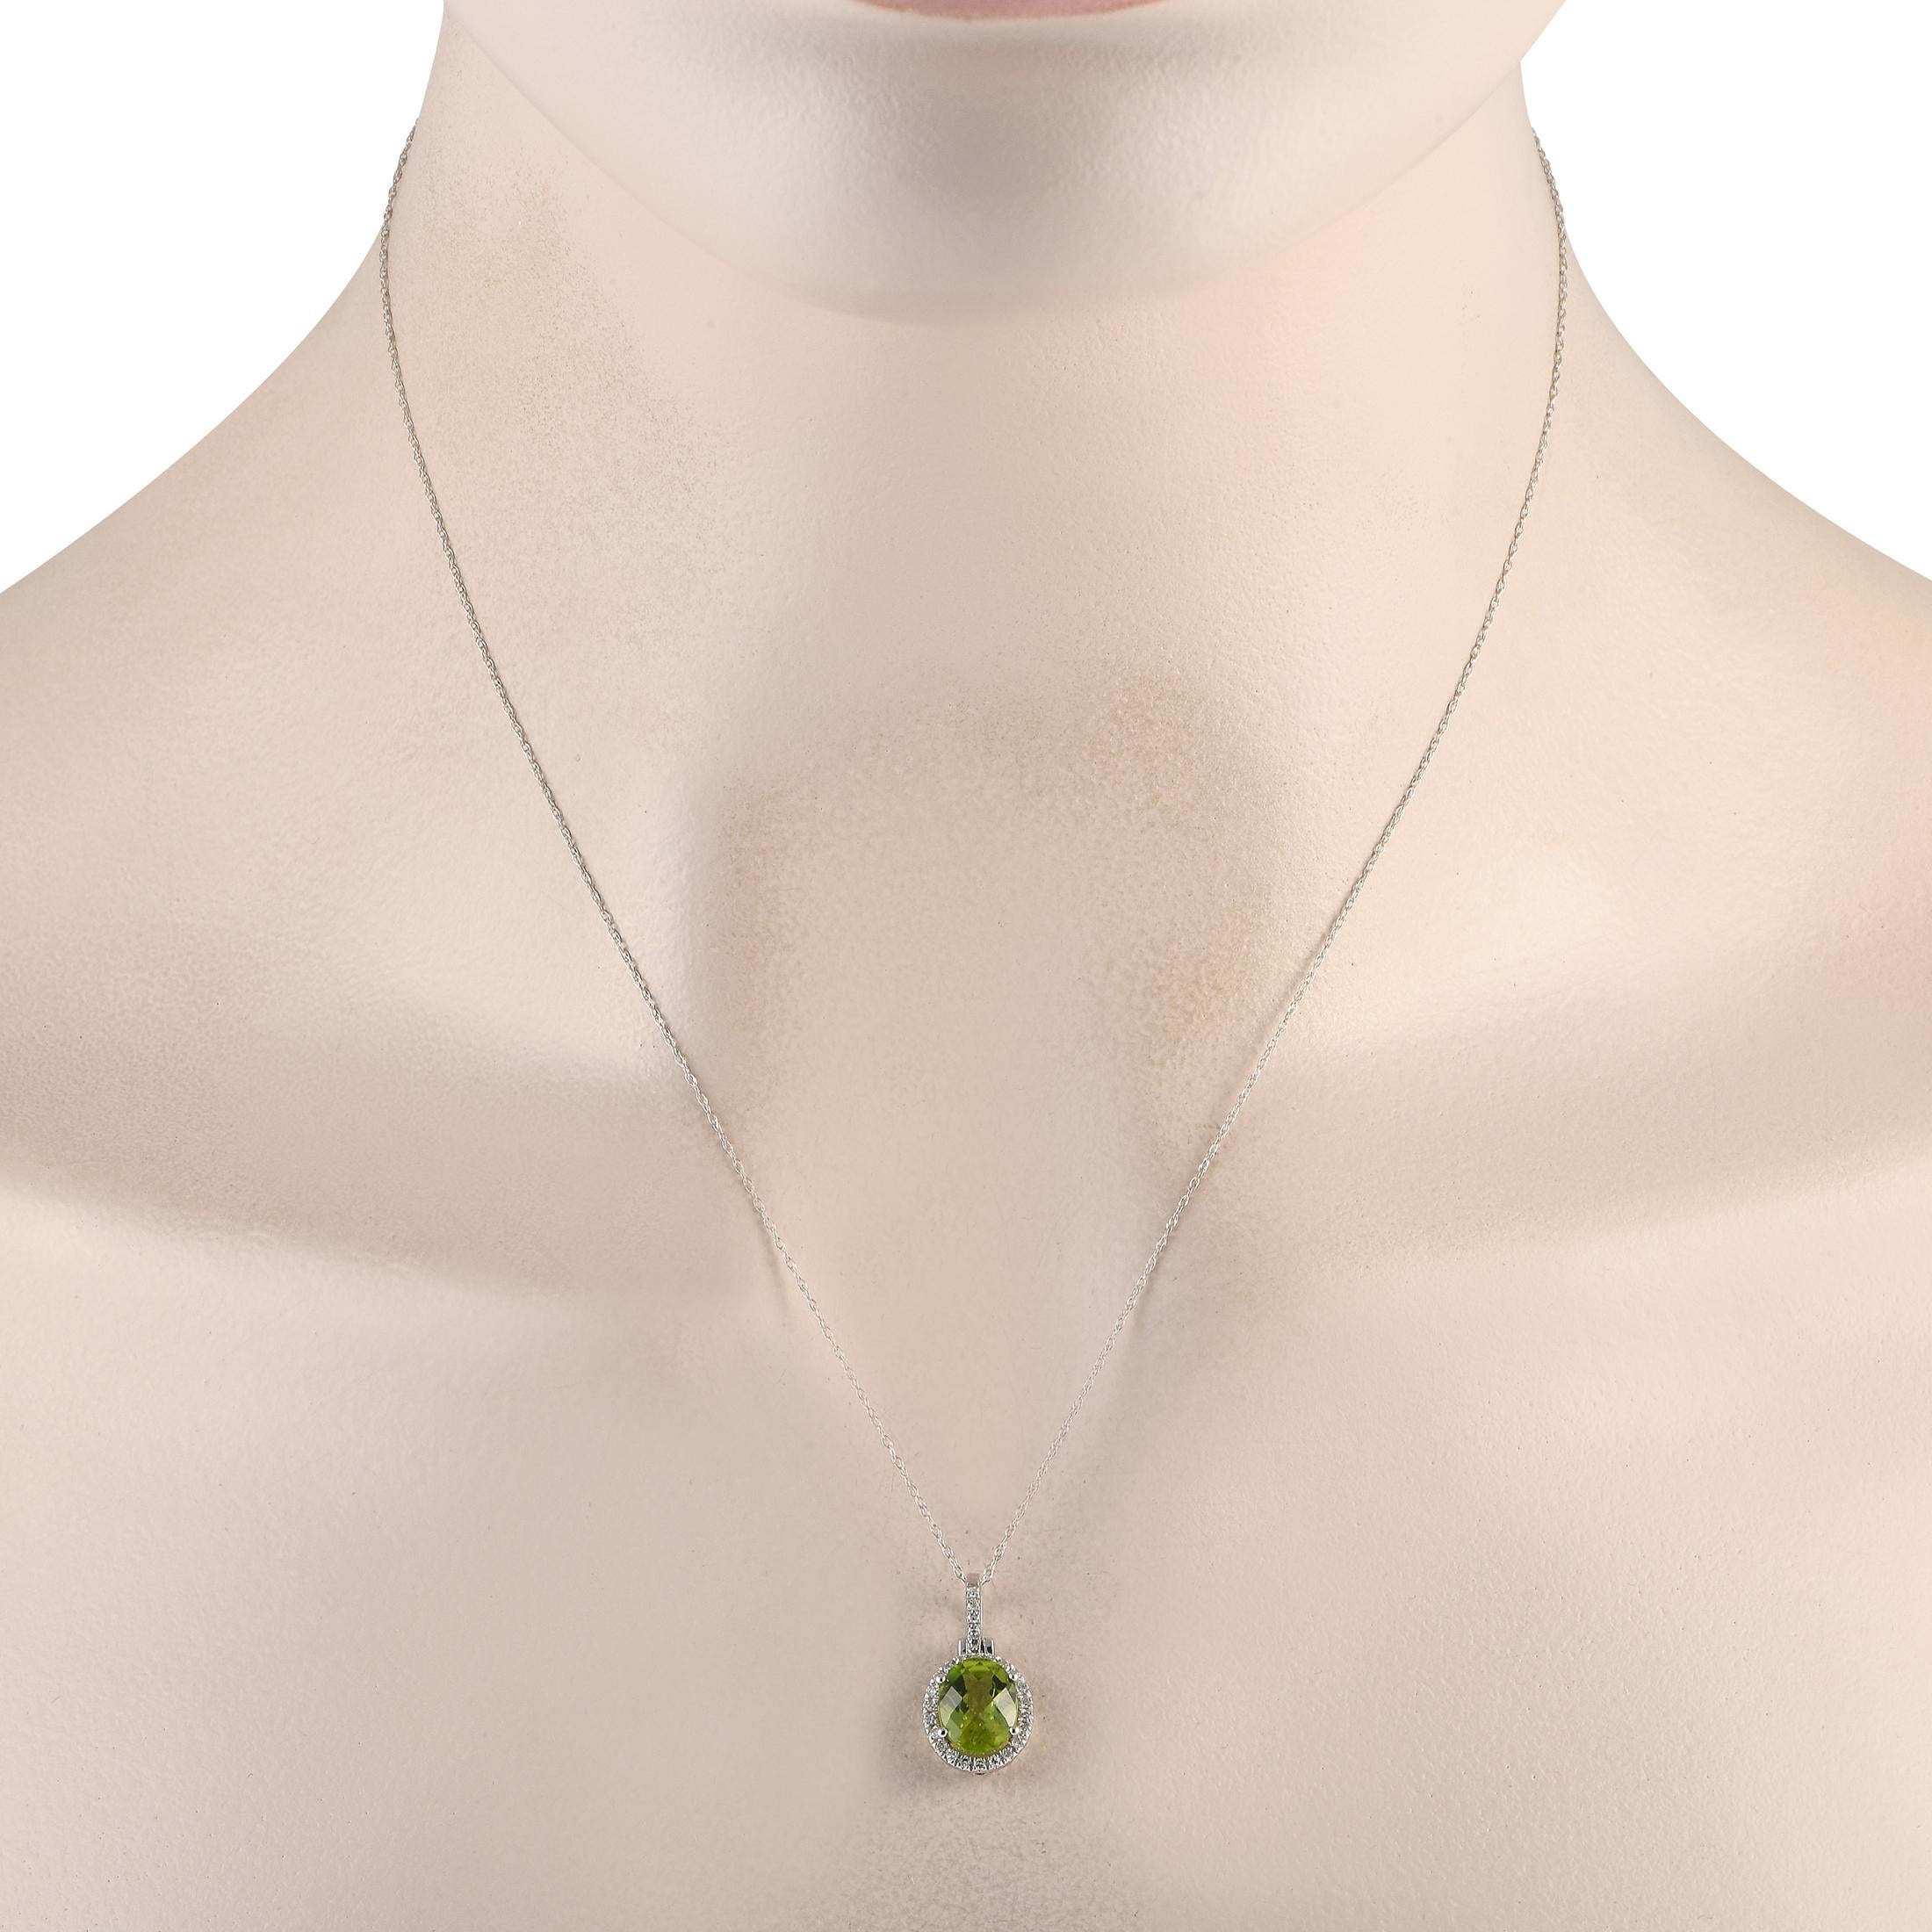 A splash of color and a shimmering sparkle are what you can expect from this LB Exclusive piece. The necklace is crafted in 14K white gold and measures 18 long. The pendant measures 0.75 by 0.45 and is decorated with an oval peridot haloed by tiny